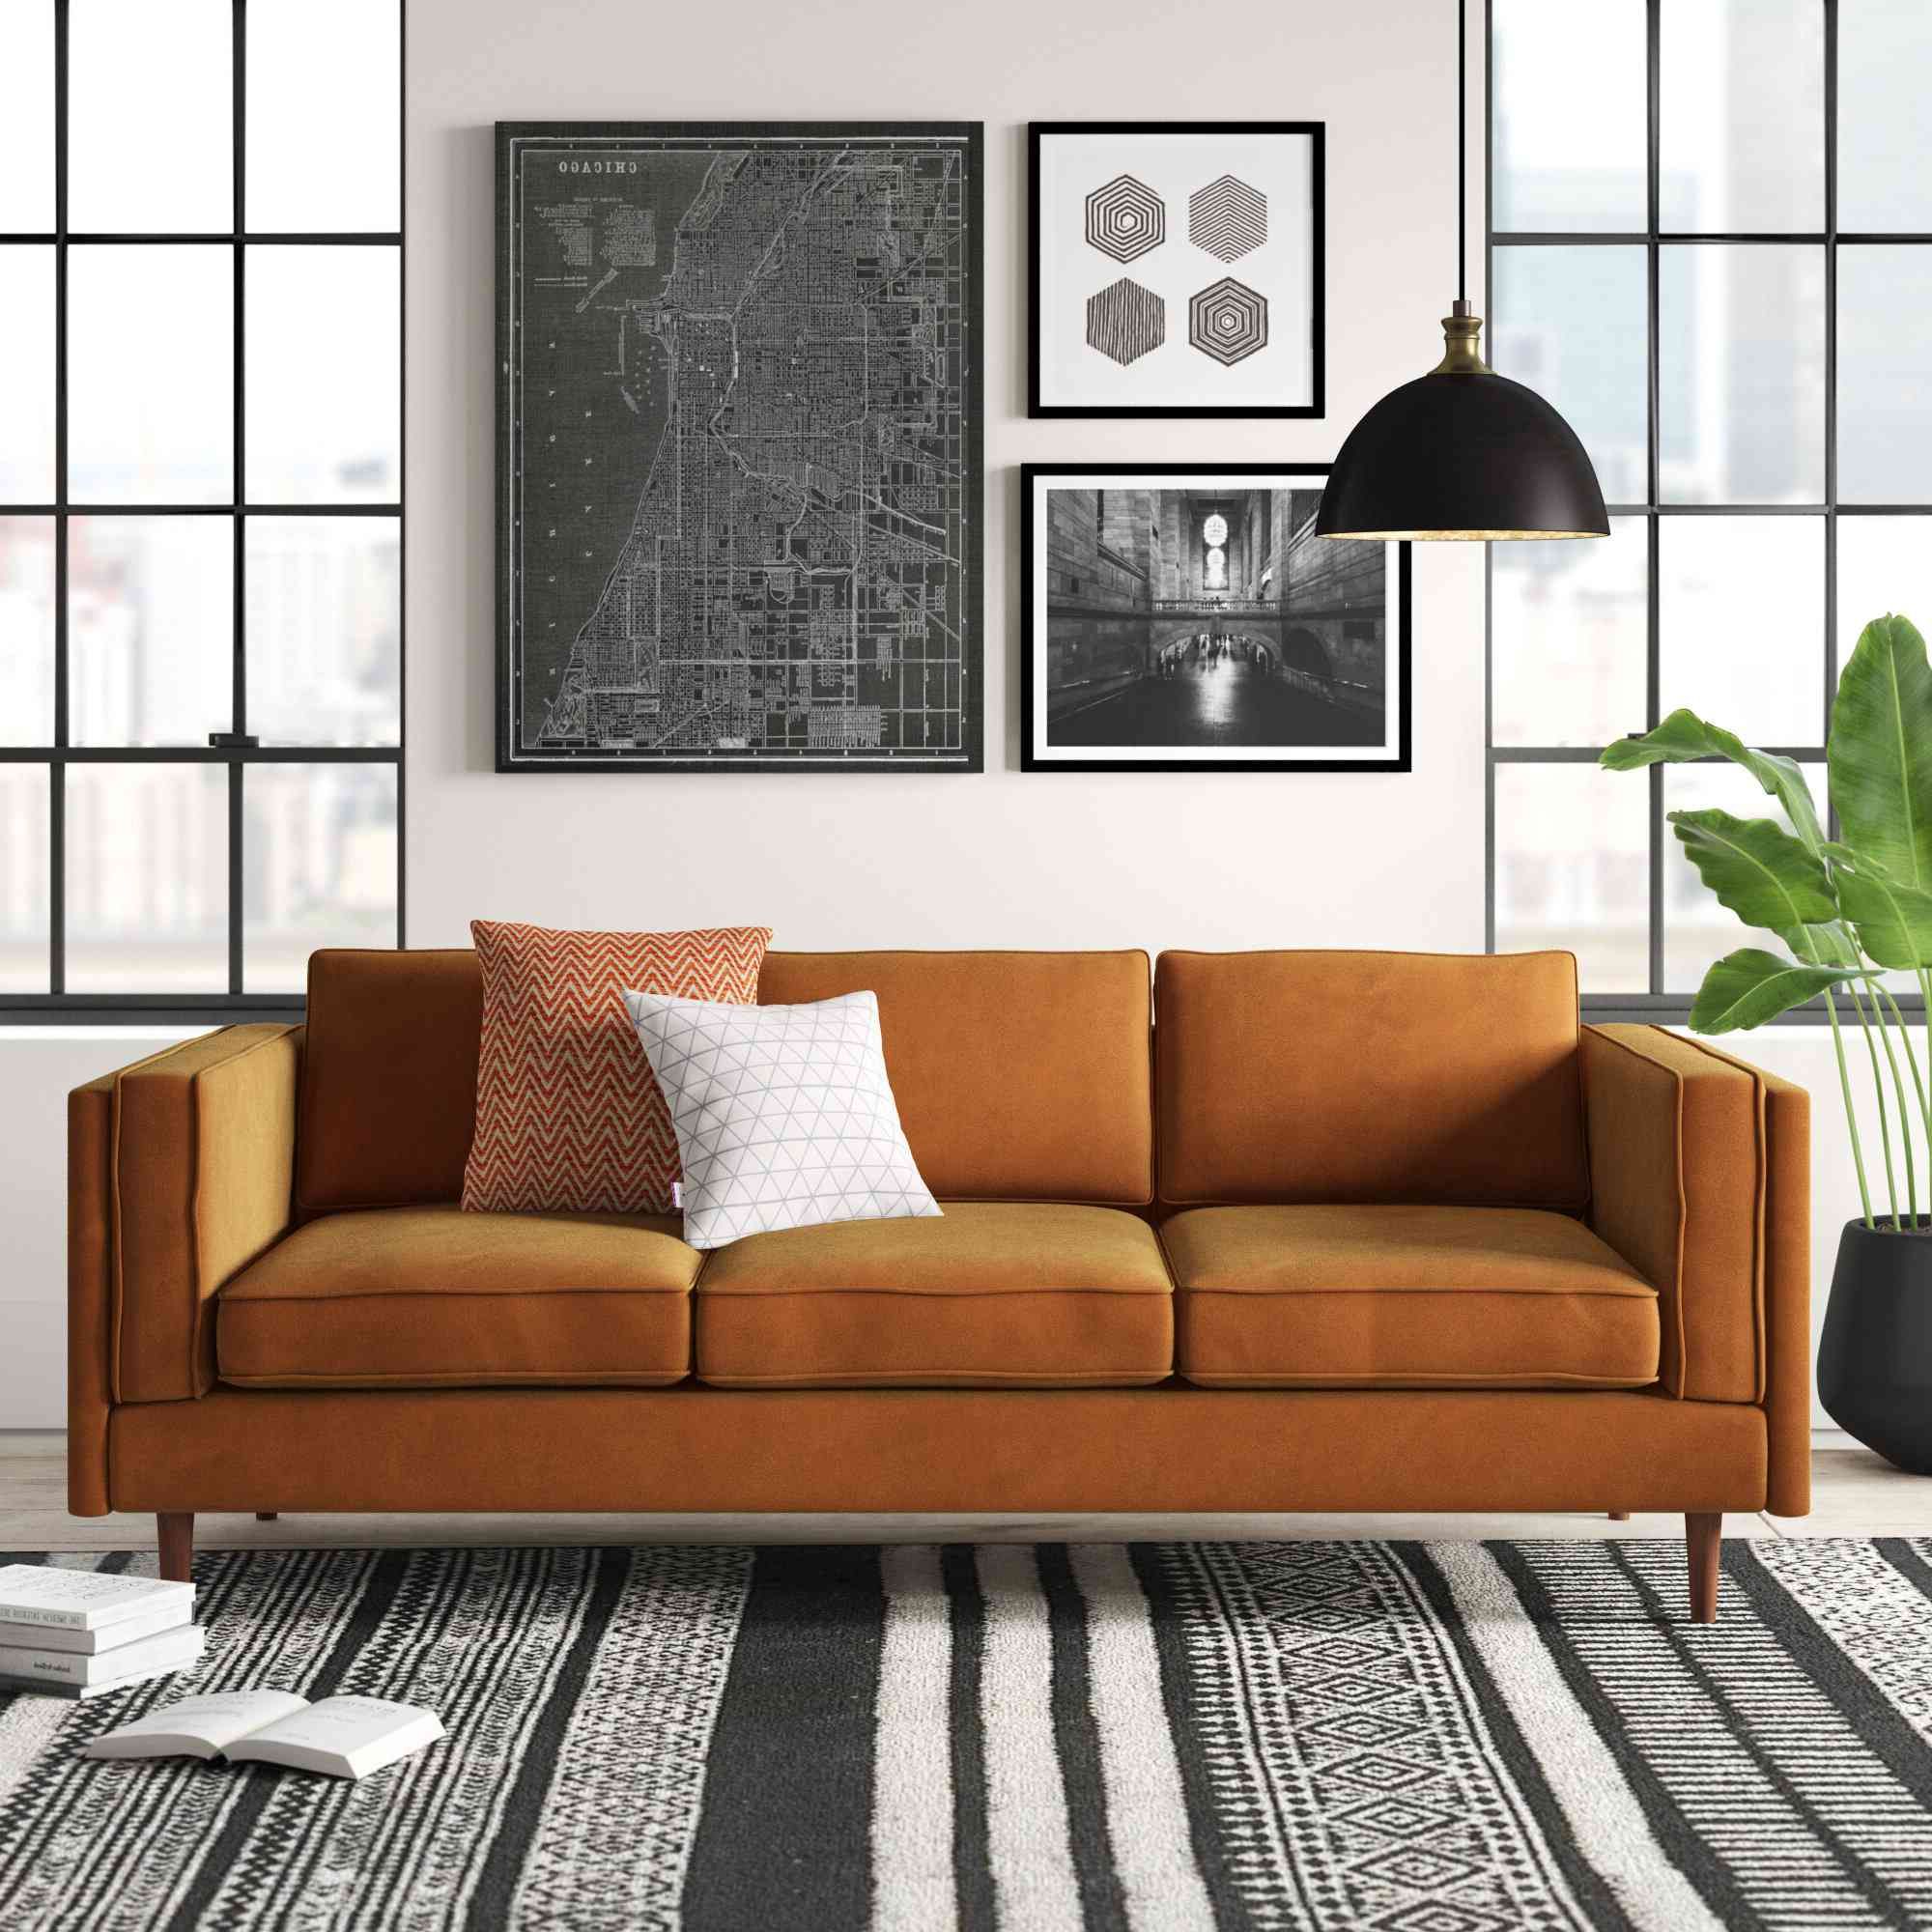 Most Popular The 12 Best Places To Buy Mid Century Modern Sofas Of 2022 Within Mid Century Modern Sofas (View 4 of 15)